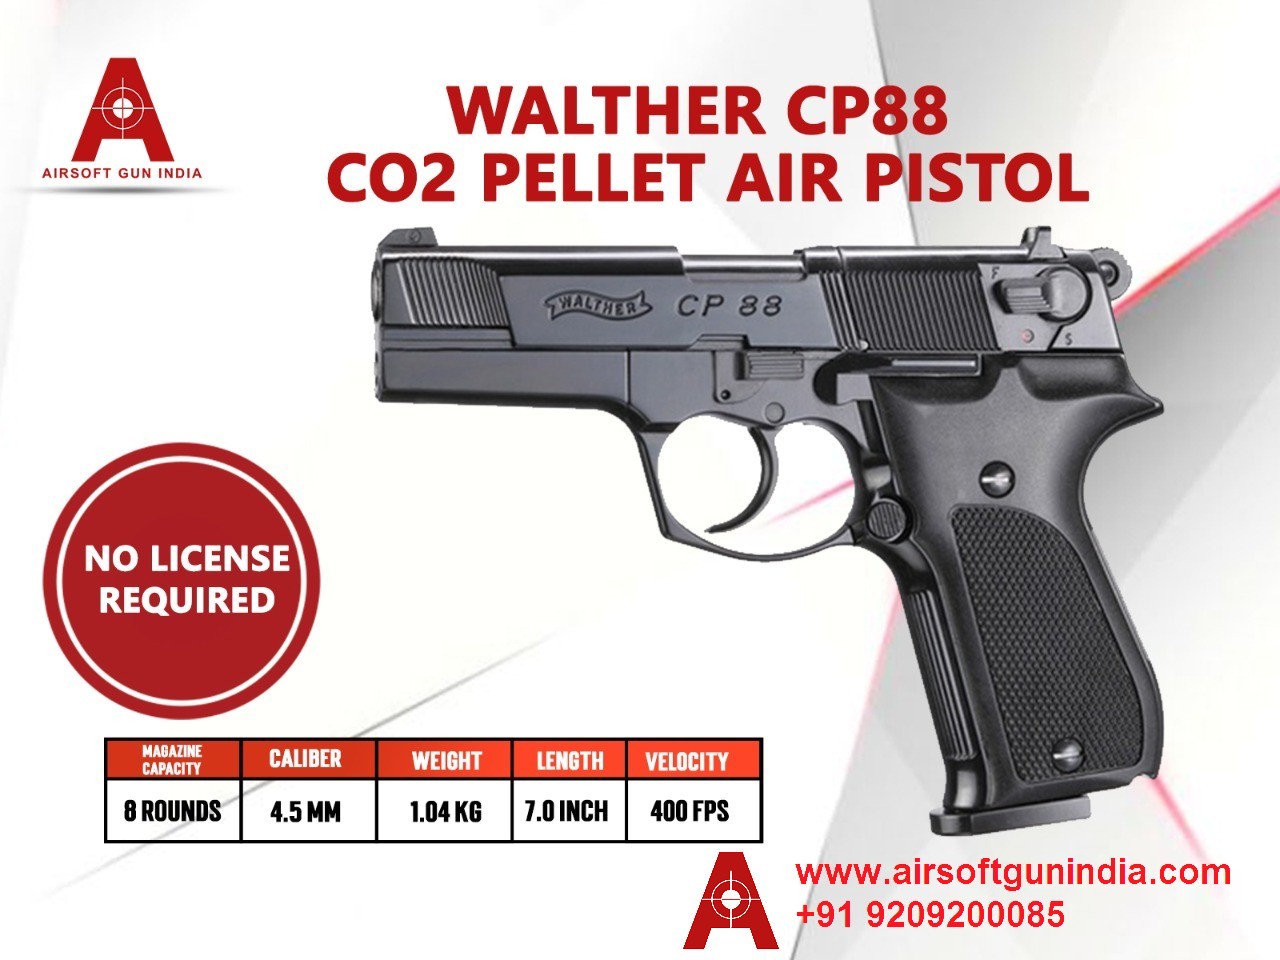 Walther CP88 CO2 Pellets .177Cal, 4.5mm Air Pistol By Airsoft Gun India